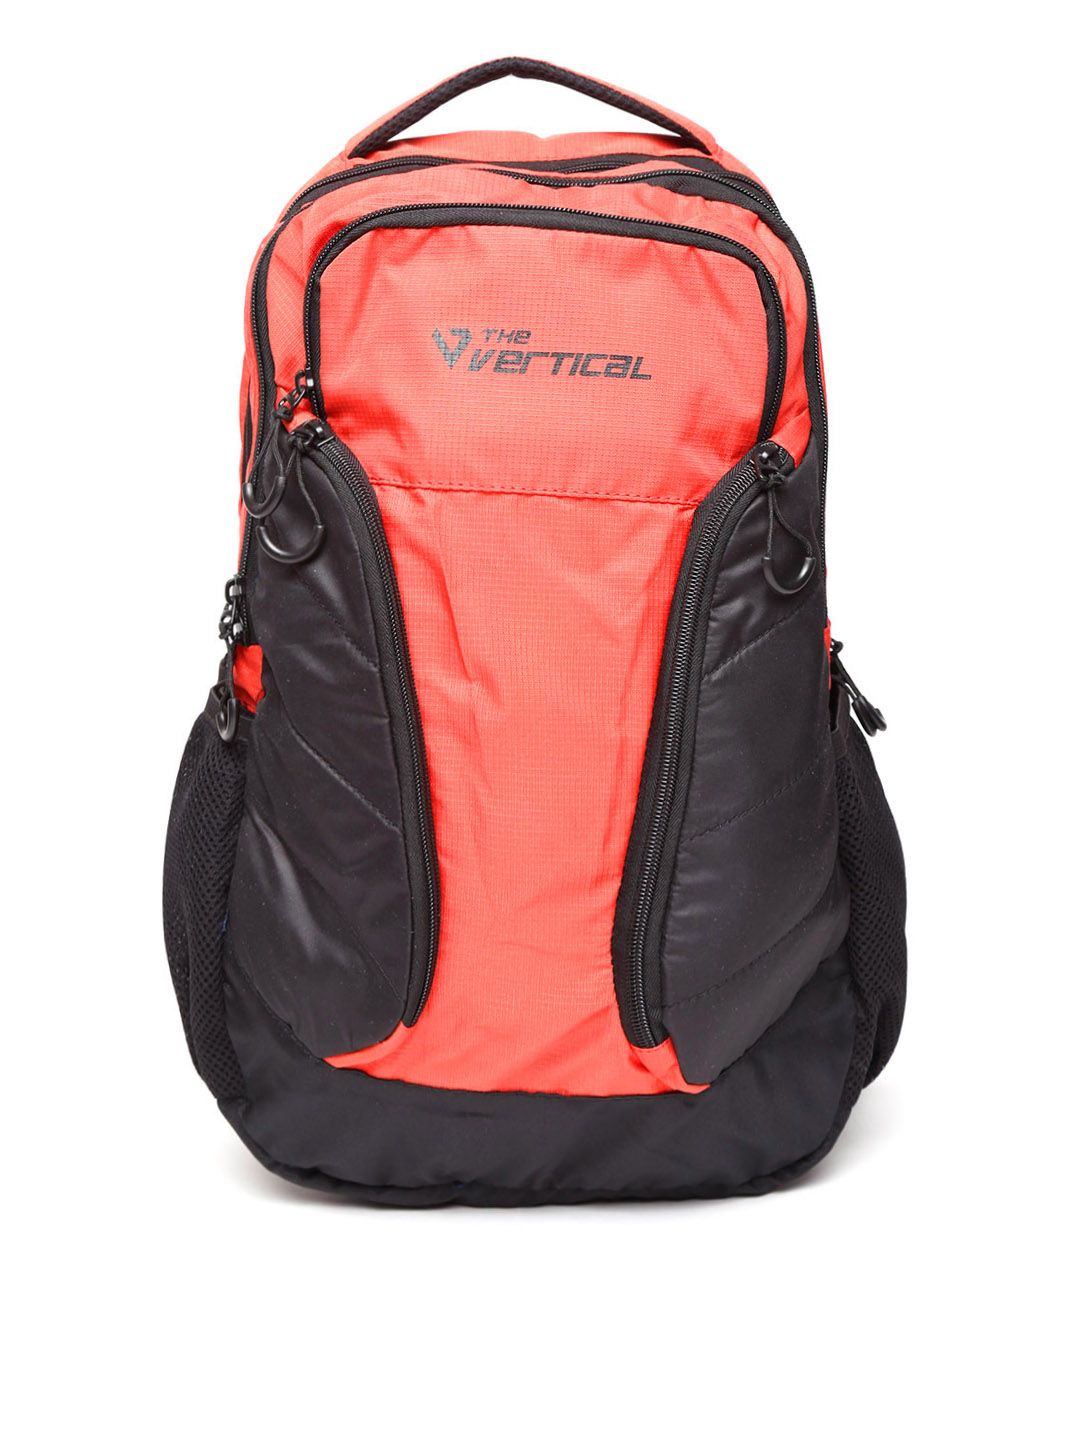 THe VerTicaL Unisex Coral Orange & Black Water-Resistant Colourblocked Laptop Backpack Price in India